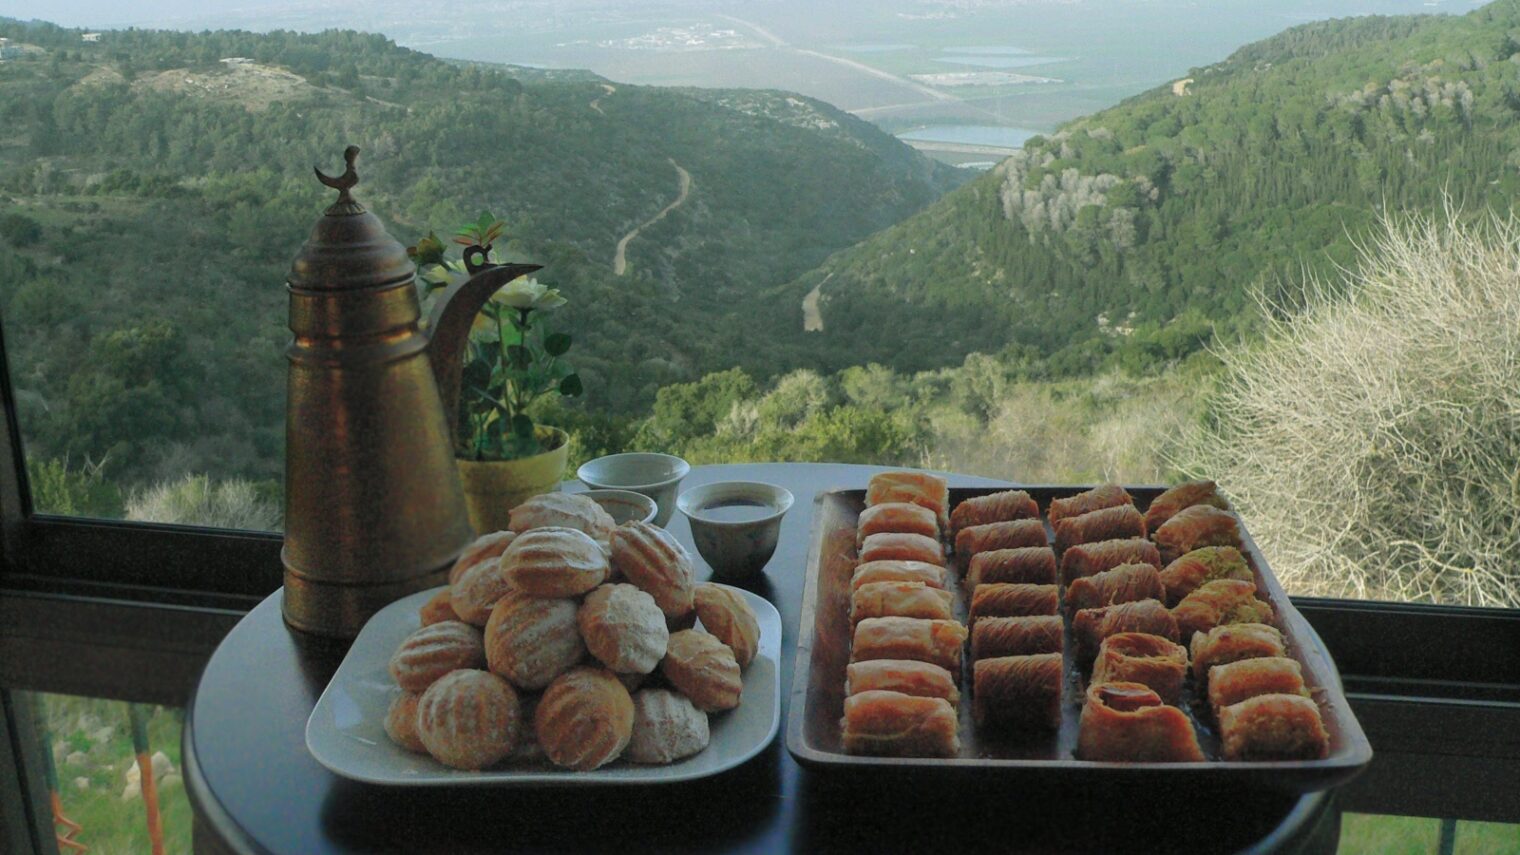 Photo of Druze cuisine and scenery courtesy of Nations and Flavors